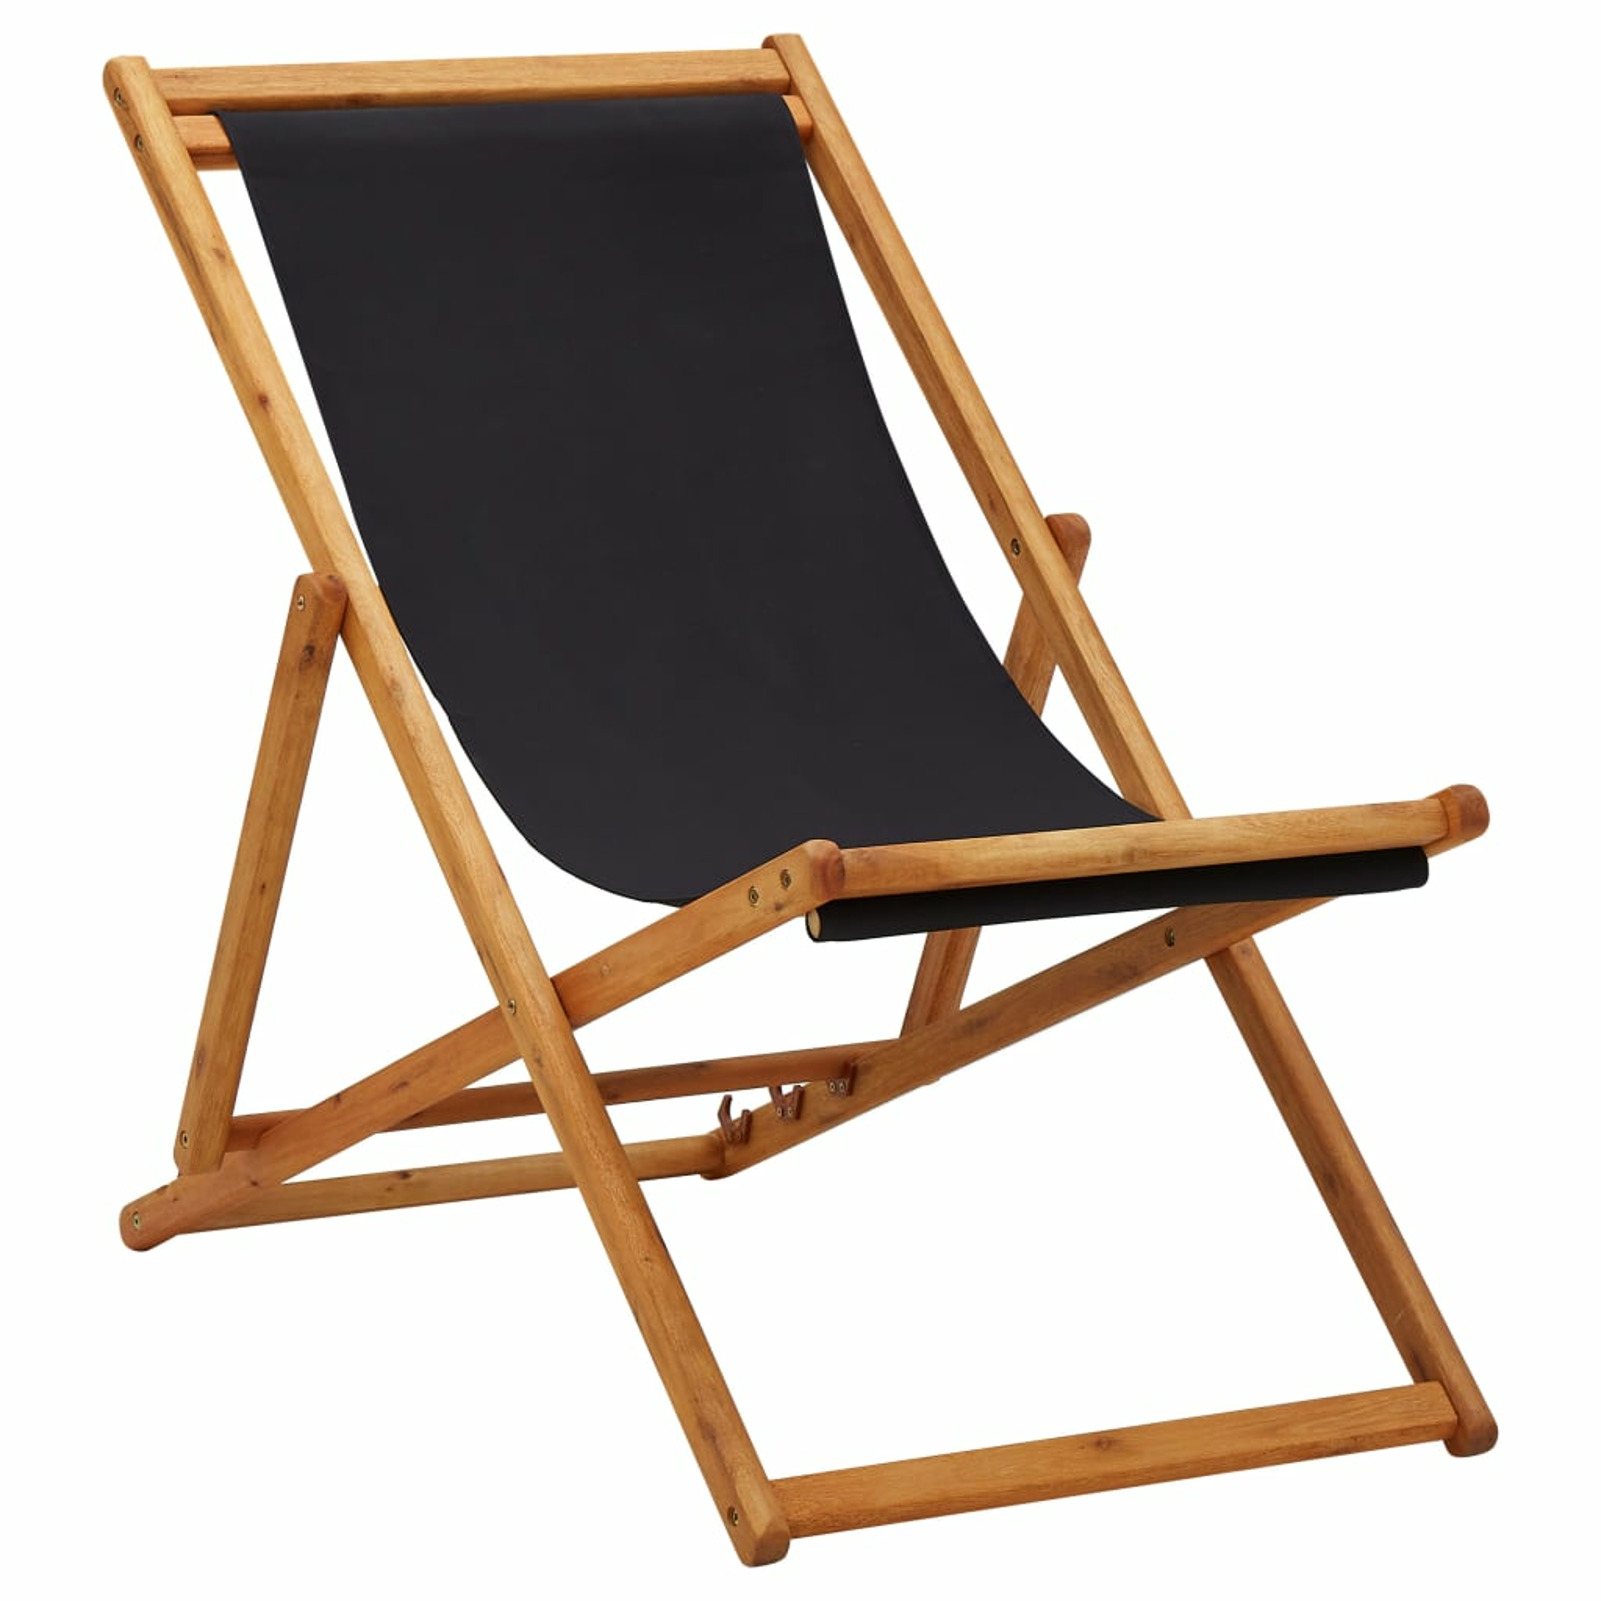 Anself Folding Beach Chair Eucalyptus Wood and Fabric Portable Camping Chair Backrest Adjustable Black for , Poolside, Balcony, Travel, Picnic - image 1 of 7